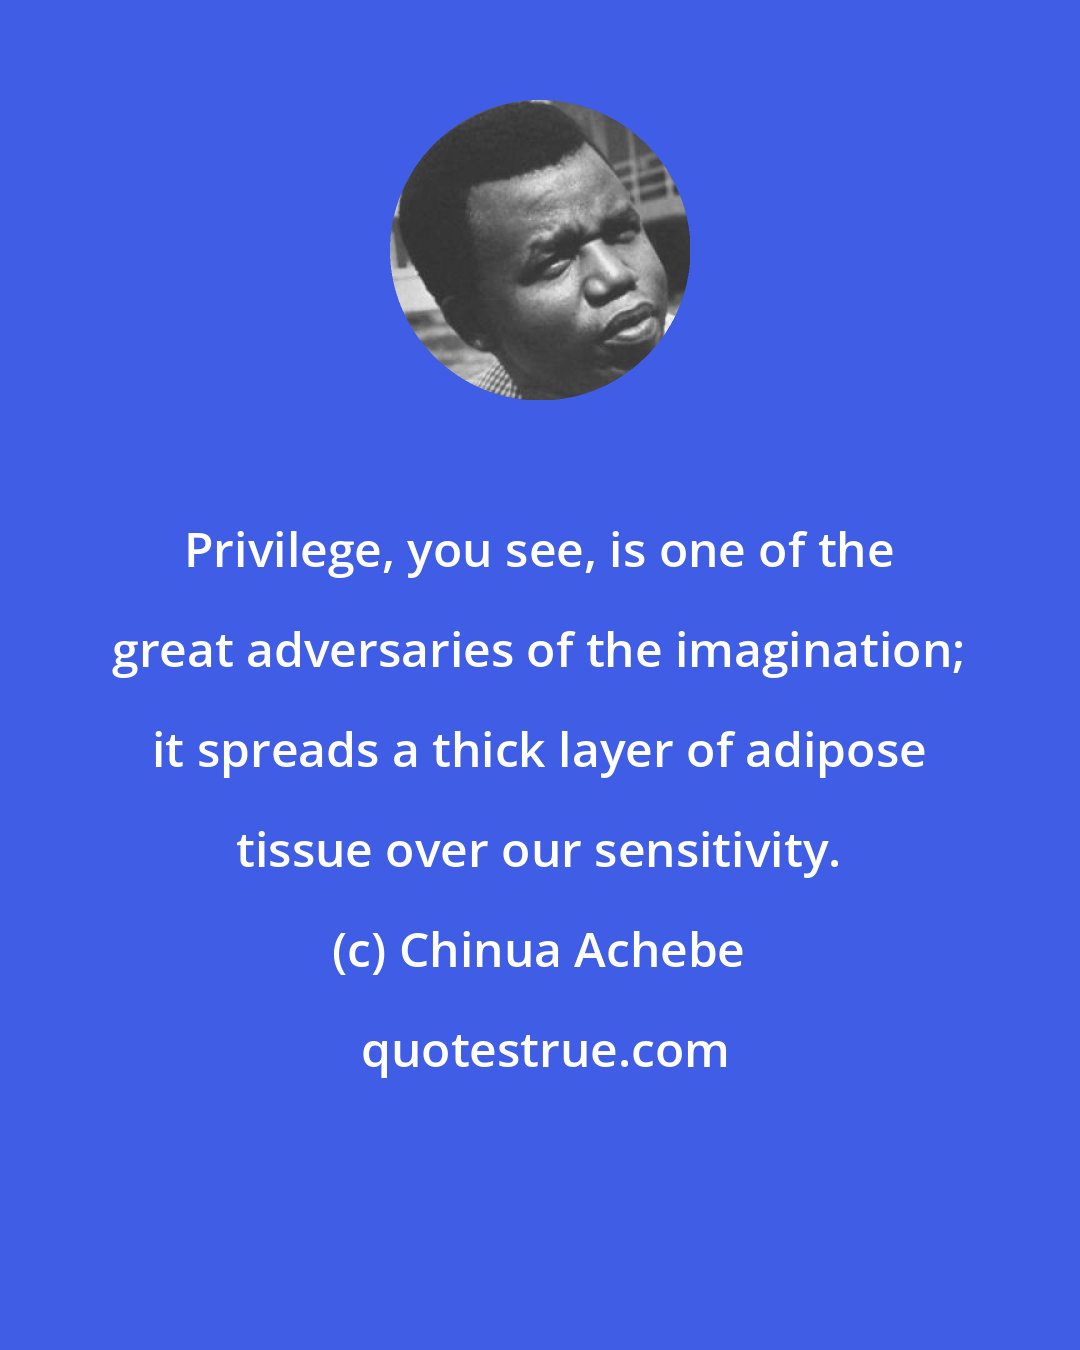 Chinua Achebe: Privilege, you see, is one of the great adversaries of the imagination; it spreads a thick layer of adipose tissue over our sensitivity.